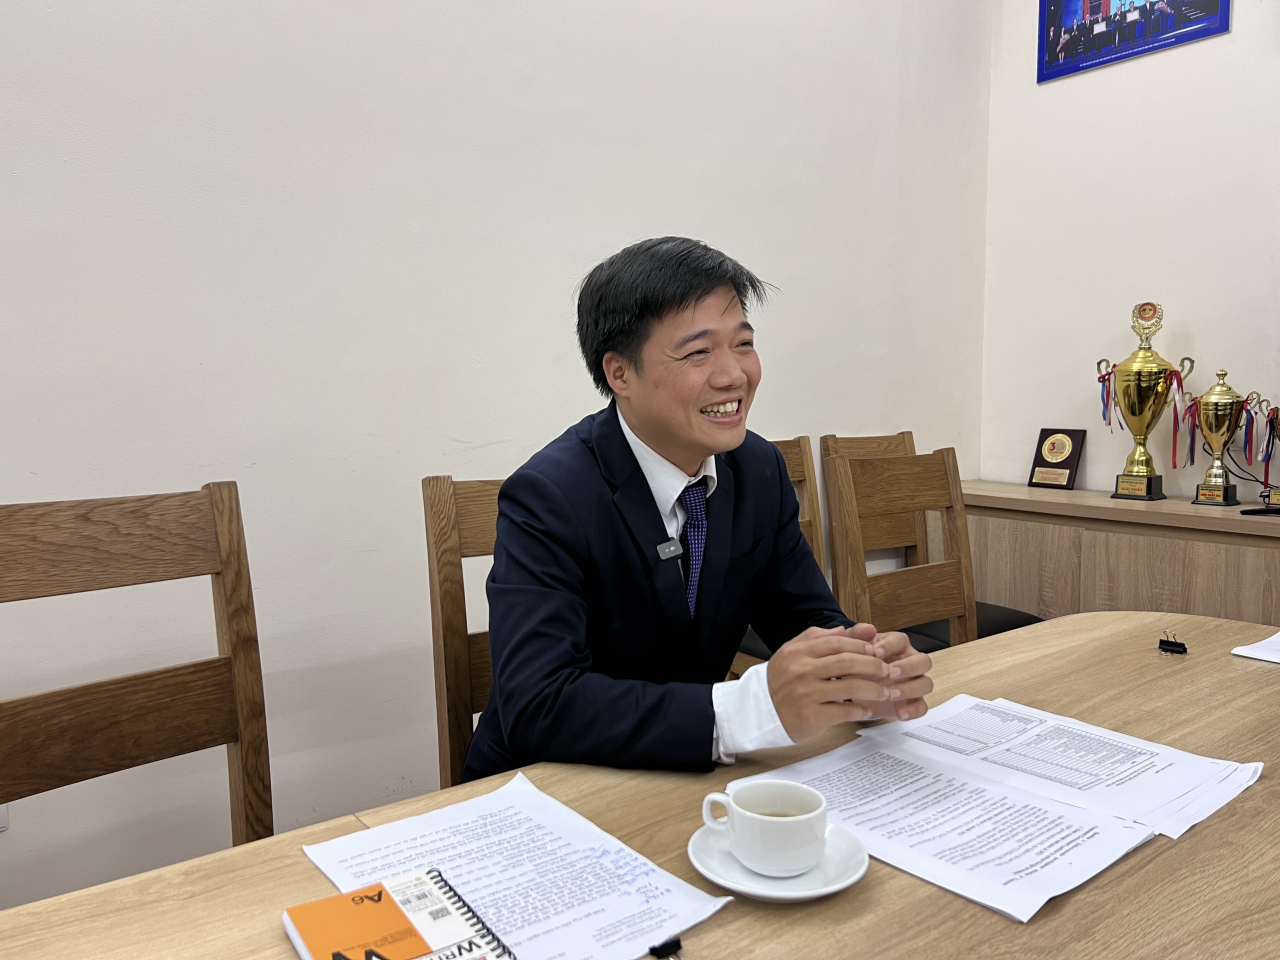 Nguyen Anh Tuan, deputy director general at the Foreign Investment Agency under Vietnam’s Ministry of Planning and Investment, speaks to a group of South Korean journalists at the ministry’s headquarters in Hanoi, Vietnam, Dec. 11, 2023. (Park Jun-hee/The Korea Herald)